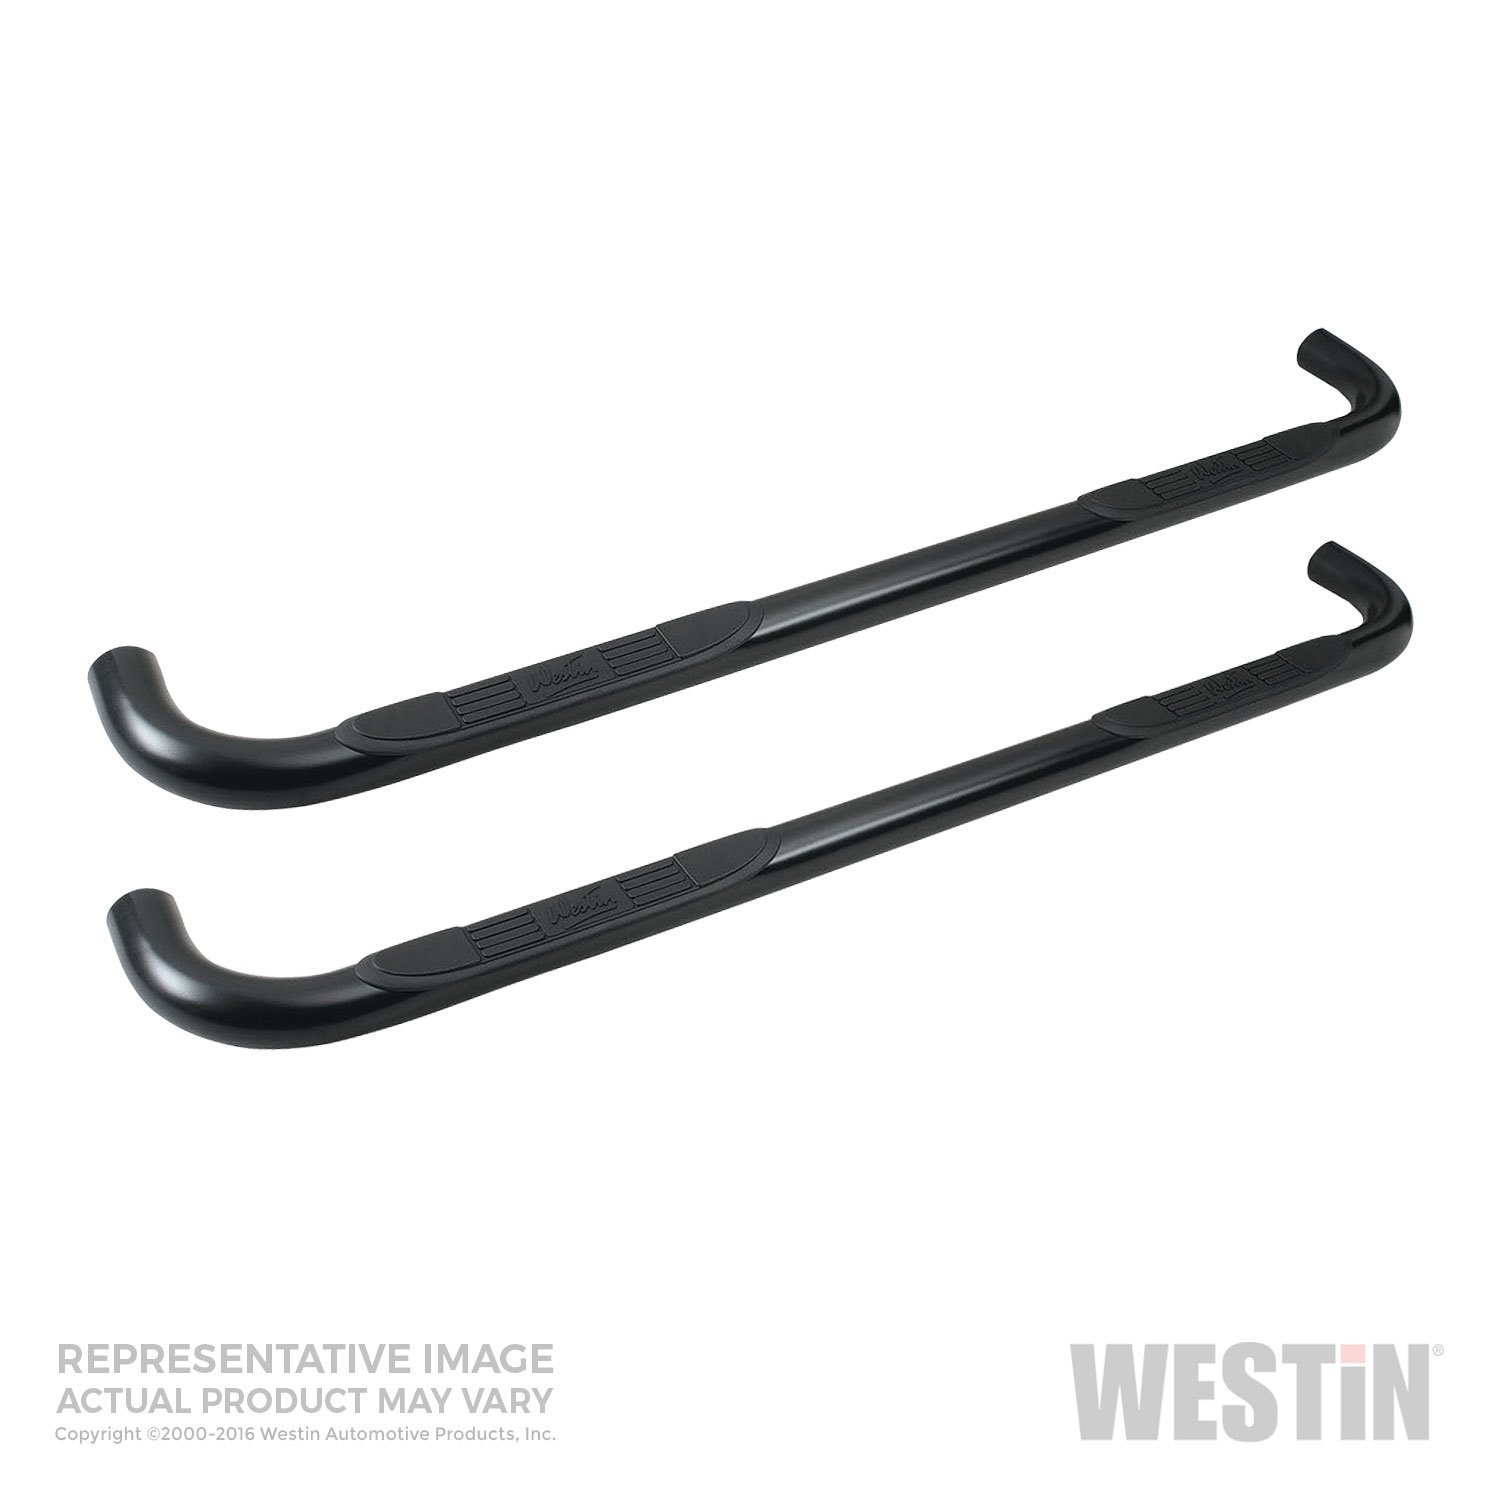 Signature Series Nerf Bars 2005-14 for Nissan Frontier, King Cab